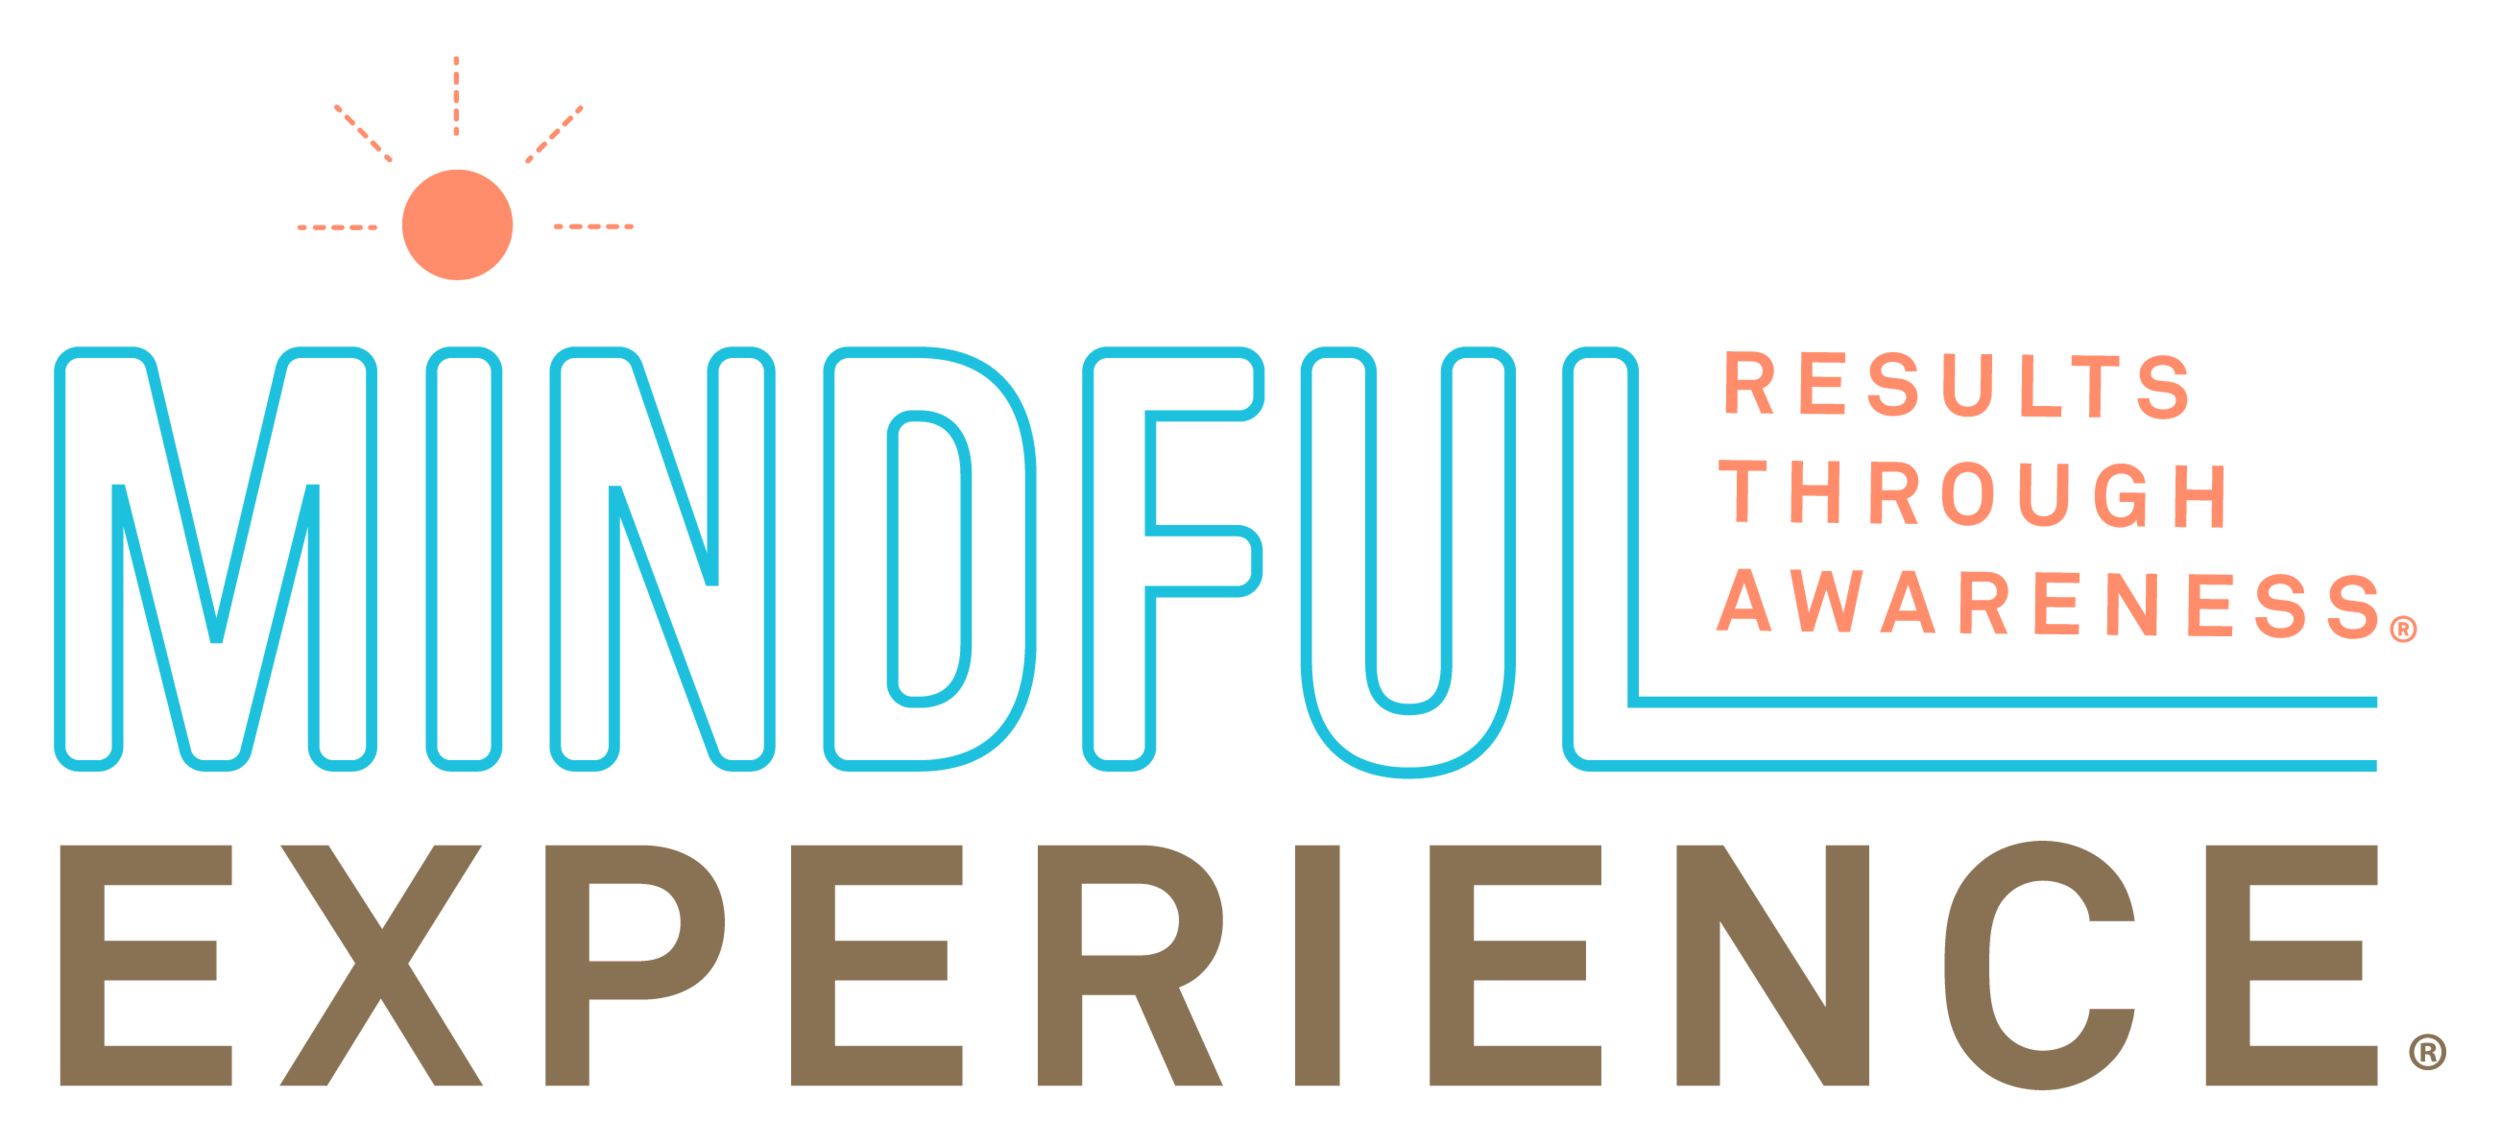 Mindful Experience